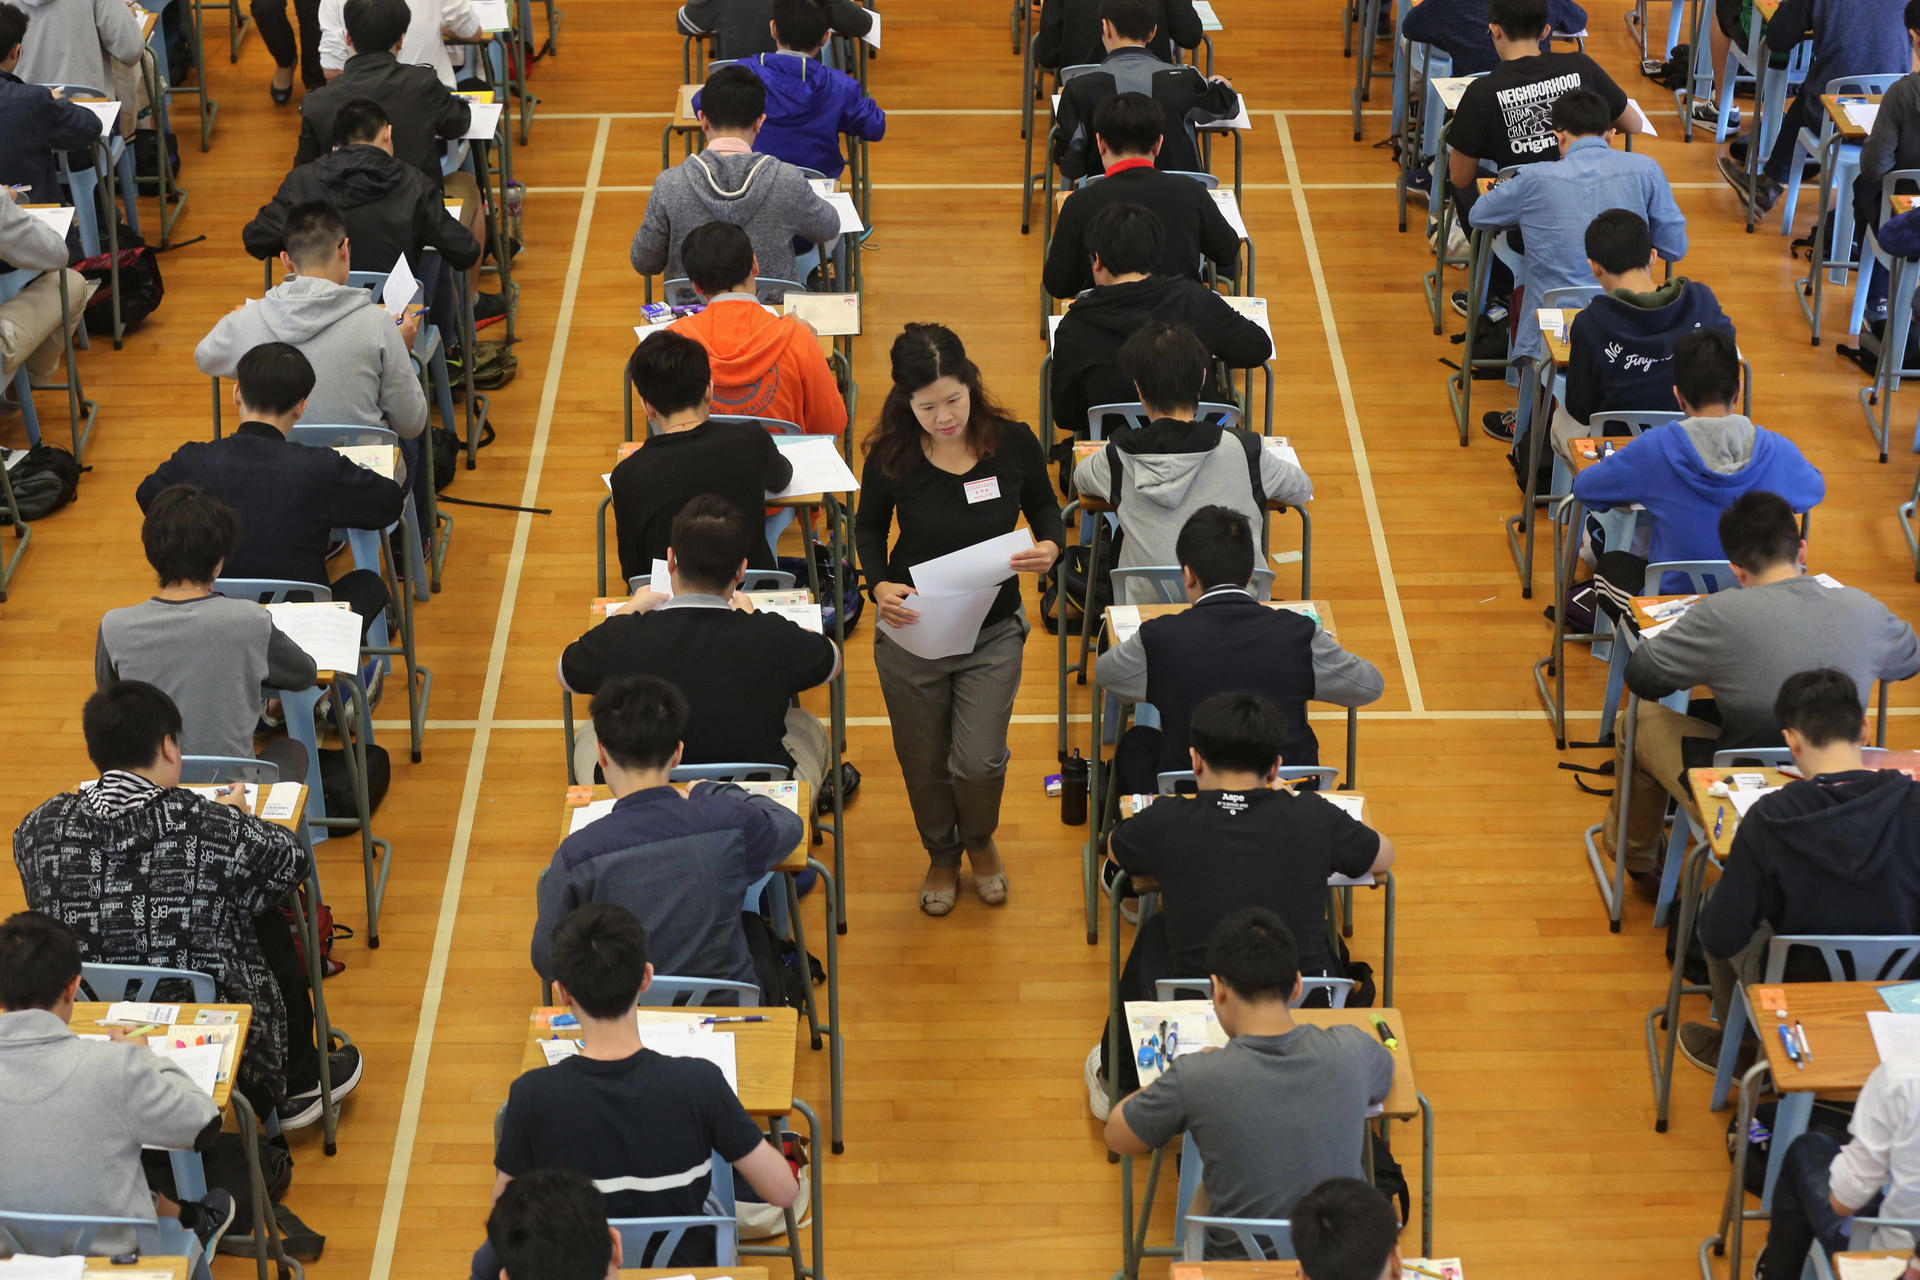 Students siting for the Diploma of Secondary Education exam. Photo: SCMP Pictures